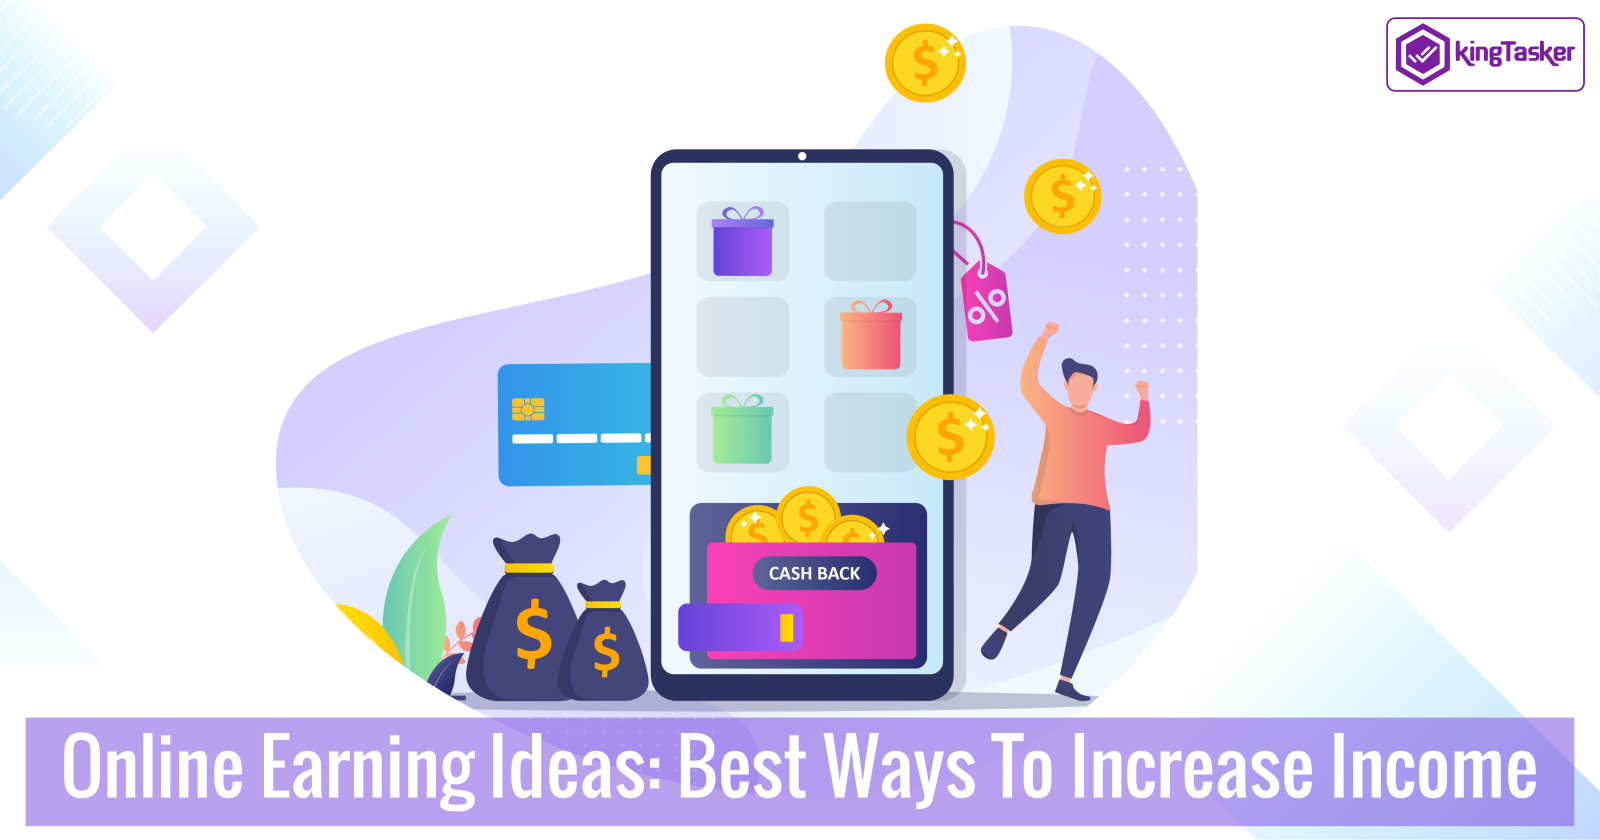 Online Earning Ideas: 5 Best Ways To Increase Income